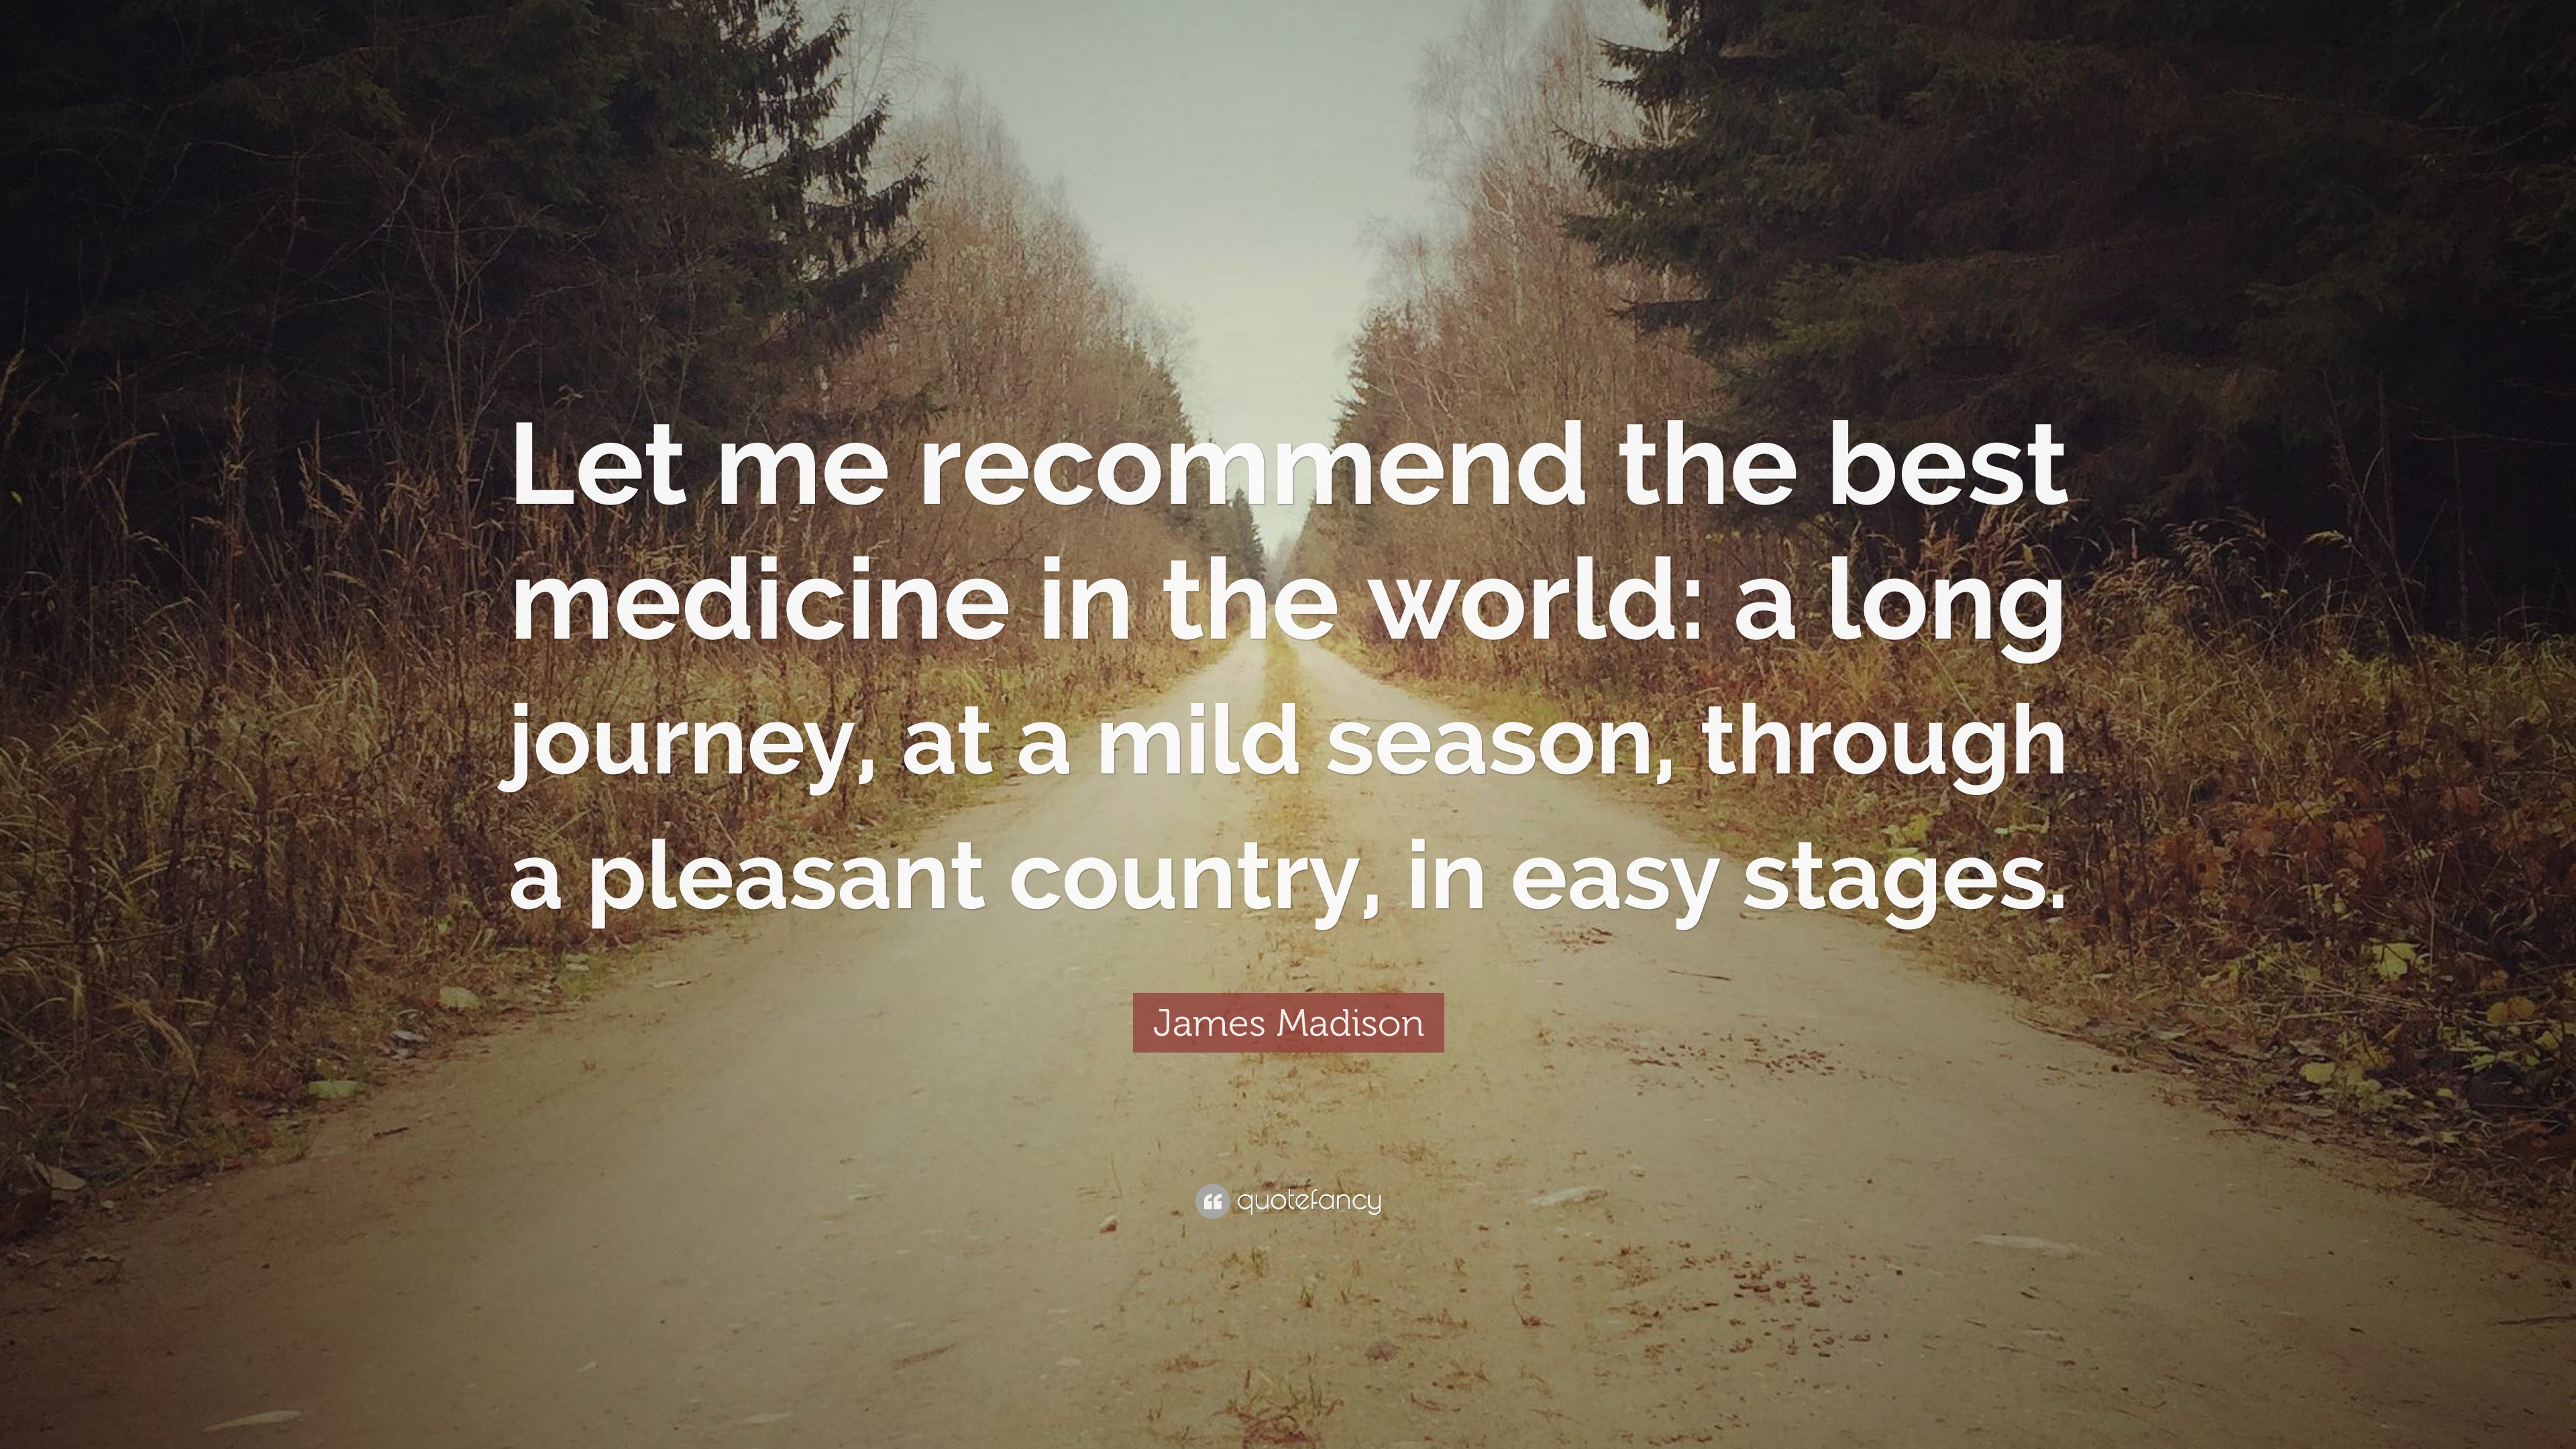 Image result for Let me recommend the best medicine in the world: a long journey, a mild season, through a pleasant country, in easy stages.